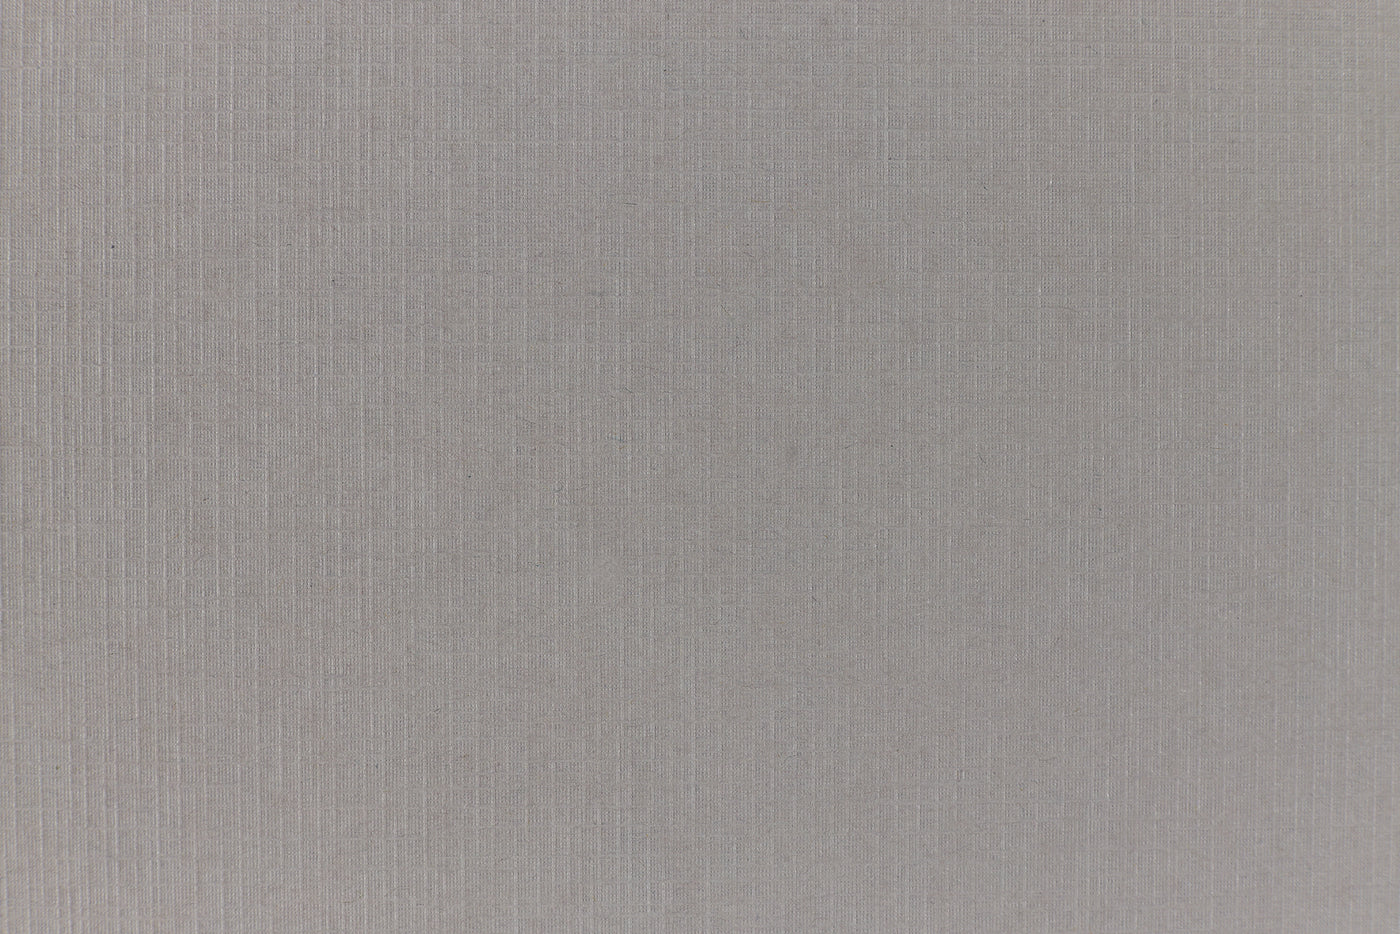 Pewter Gray Cardstock, Linen Pattern (Royaltone, Cover Weight)